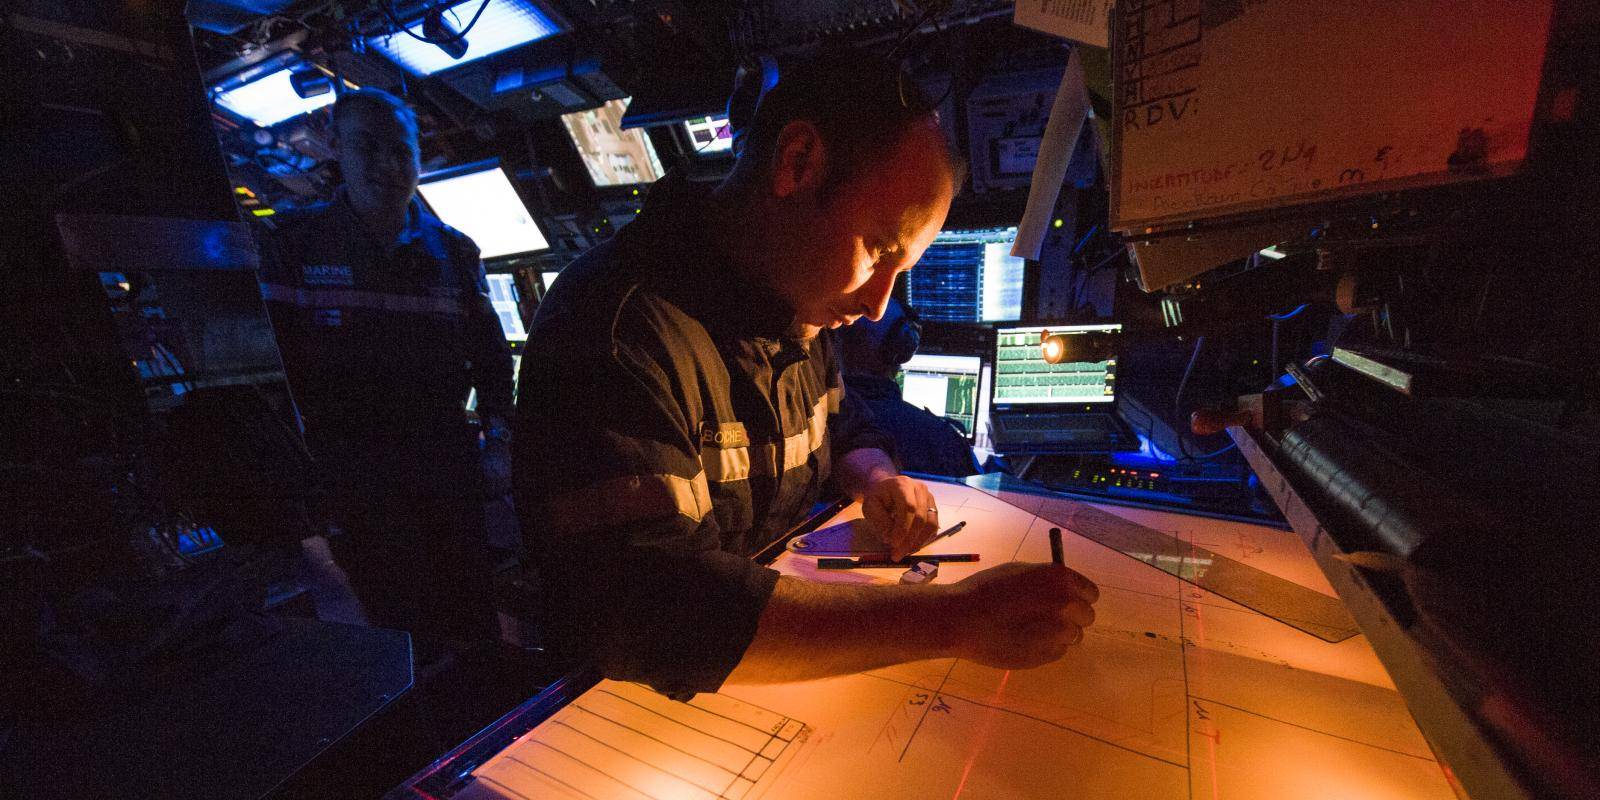 A man in naval uniform sits at a desk in front of illuminated screens onboard a submarine.